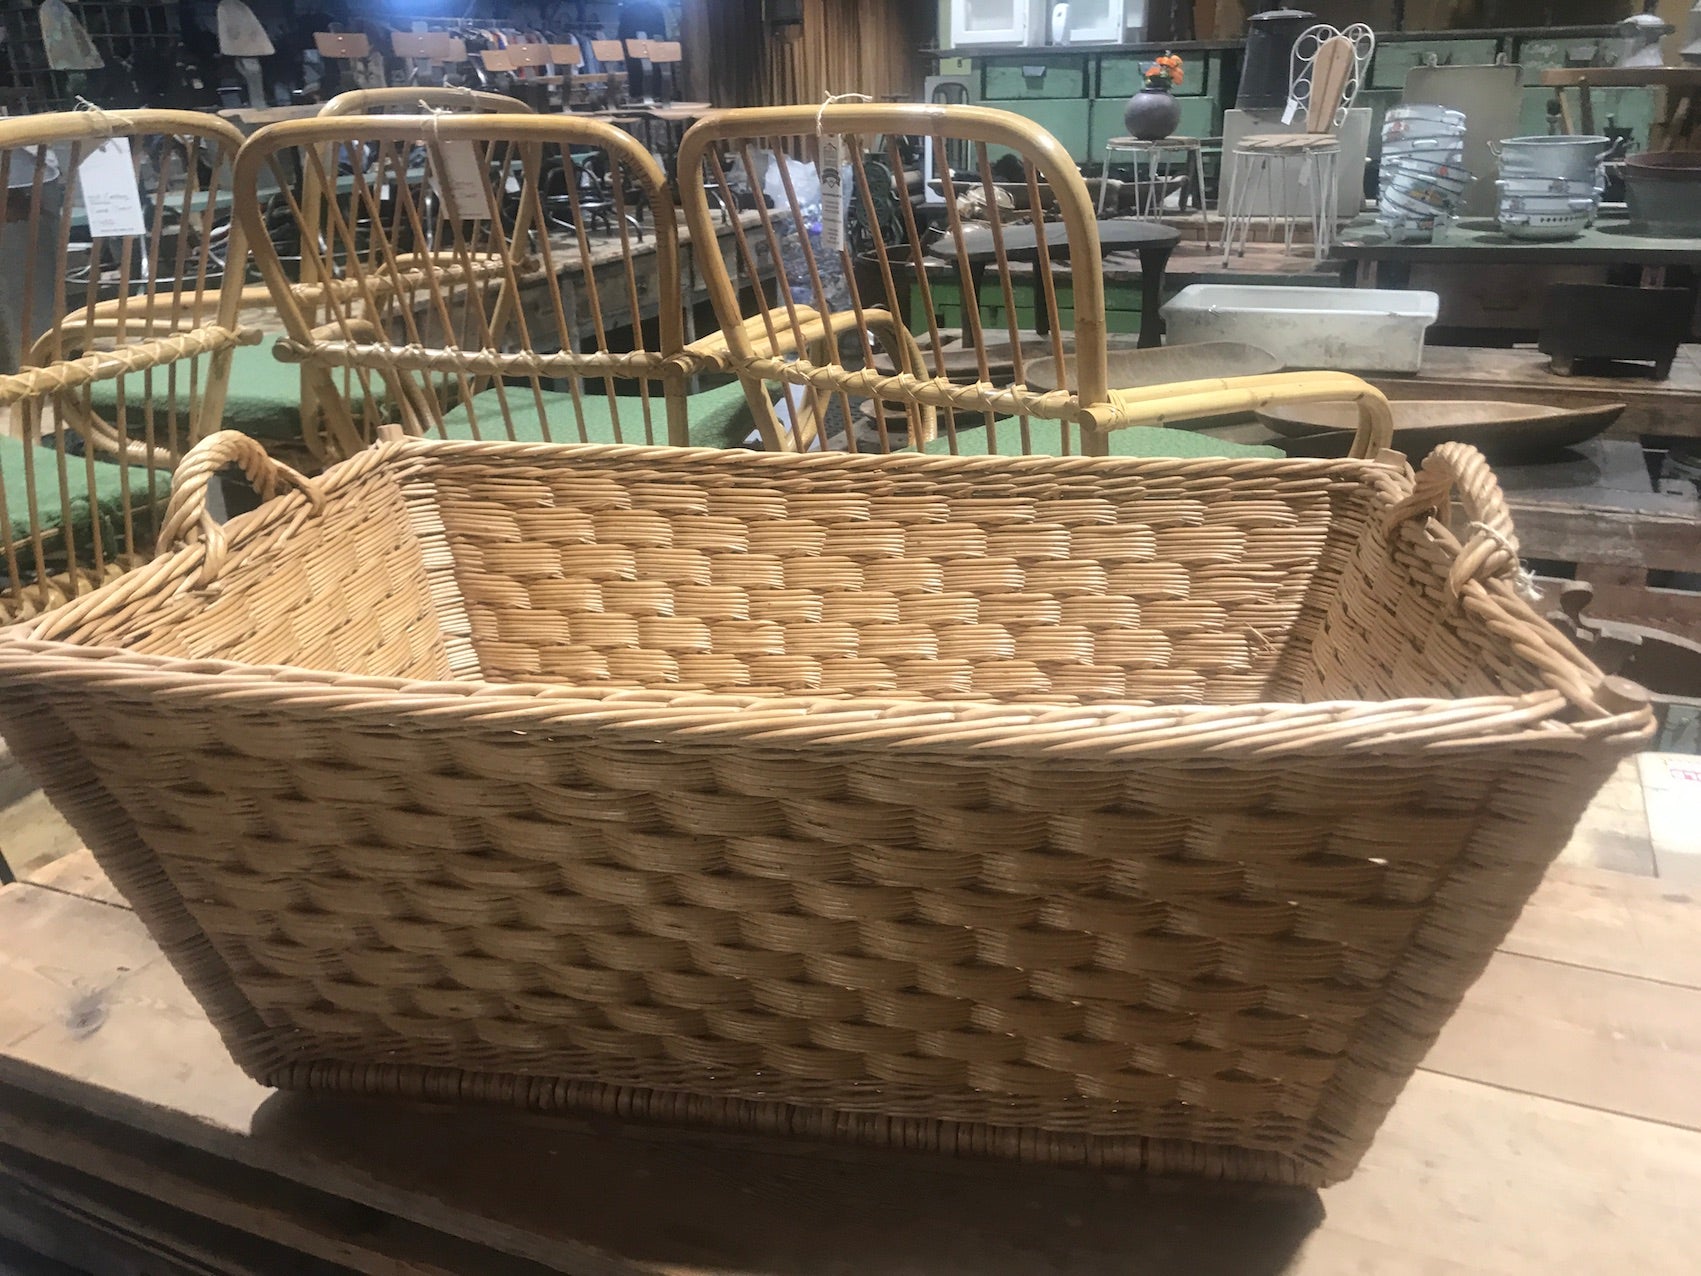 Vintage industrial French cane willow bakers basket  #2562/8